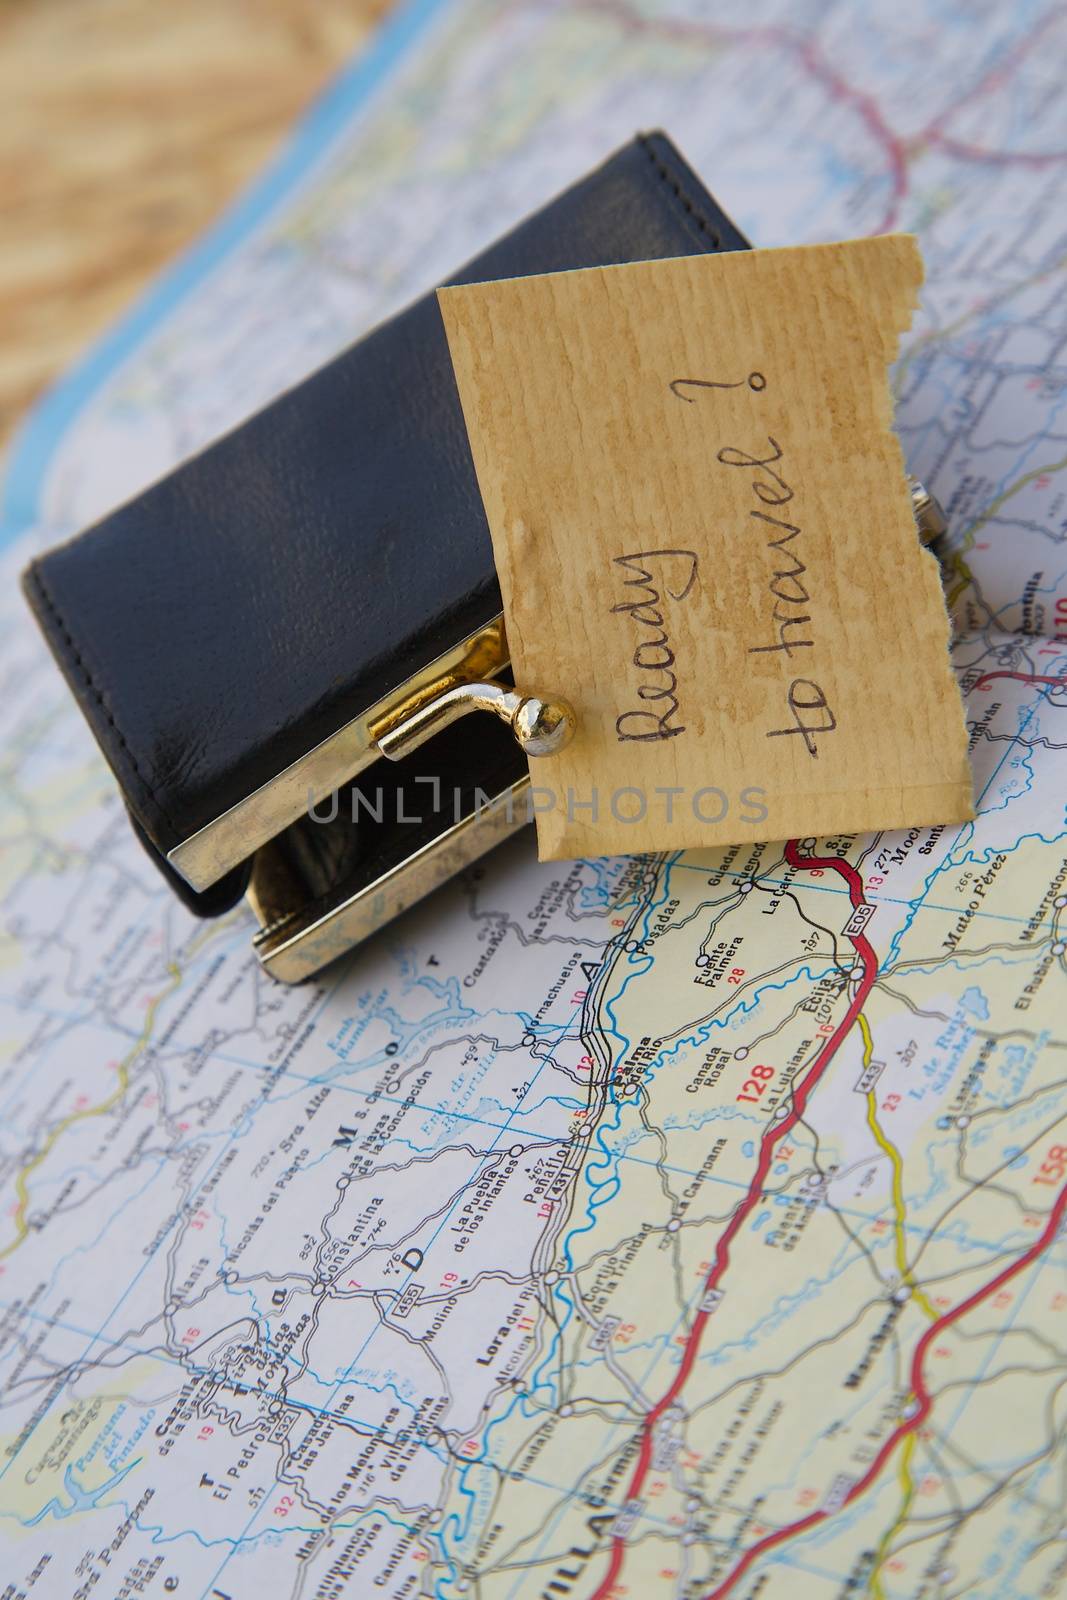 Message written on a piece of paper left close to the wallet by tolikoff_photography